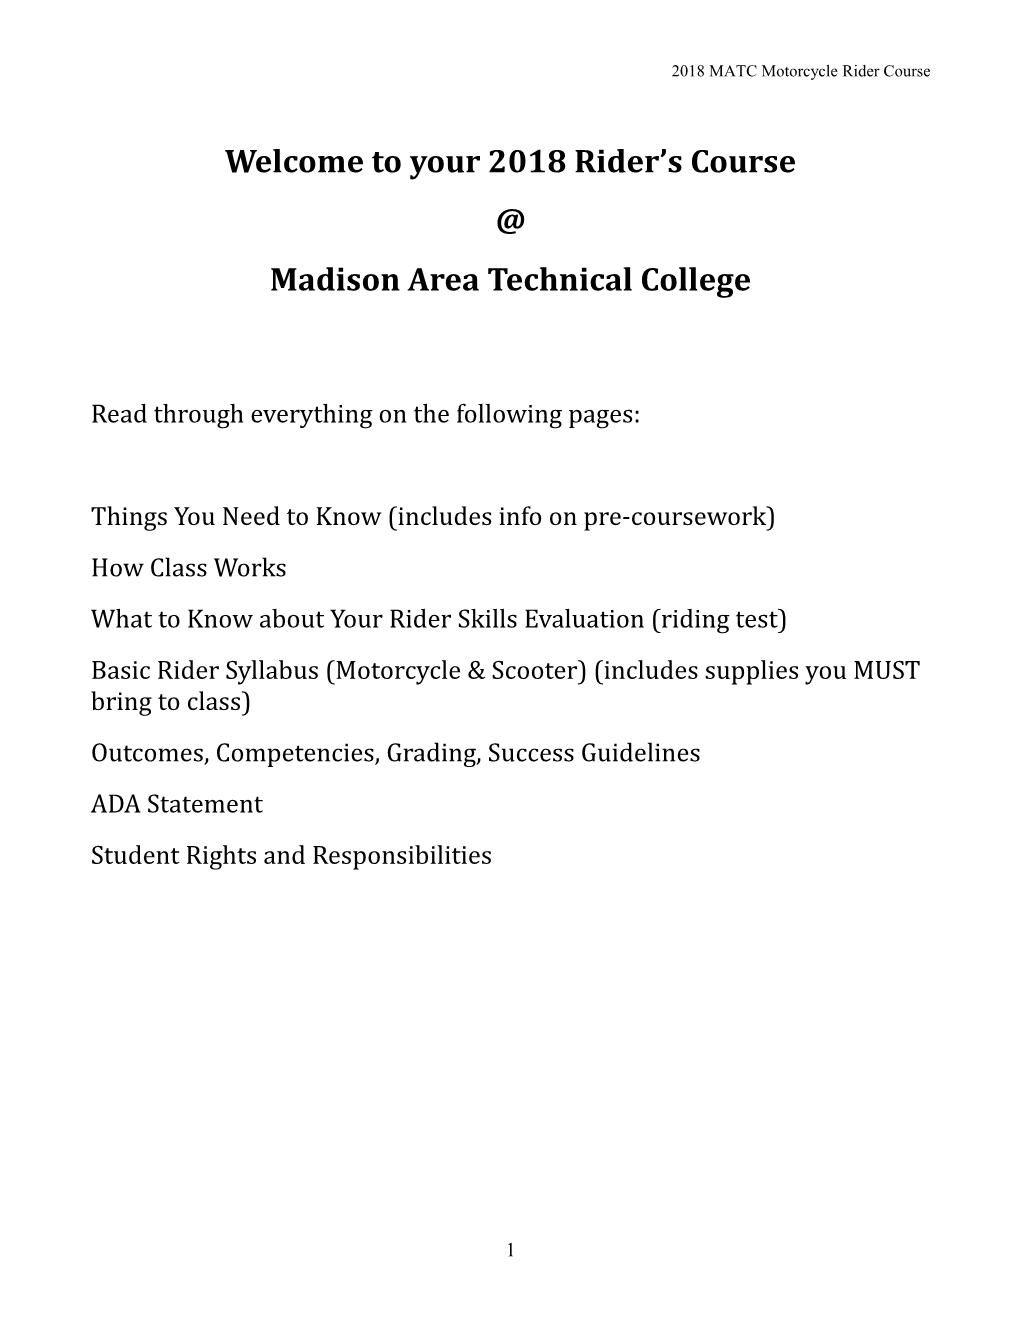 Welcome to Your 2018 Rider S Course